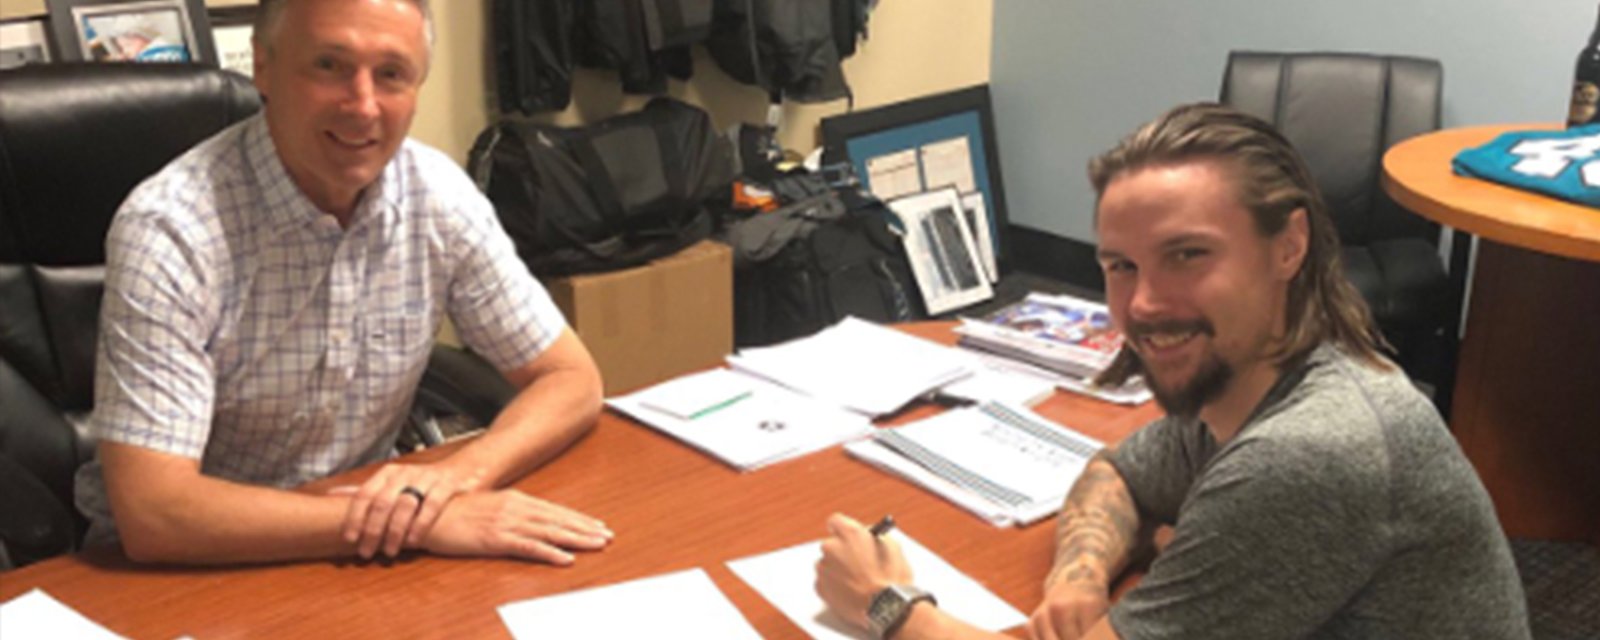 ICYMI: Karlsson signs historic contract with Sharks